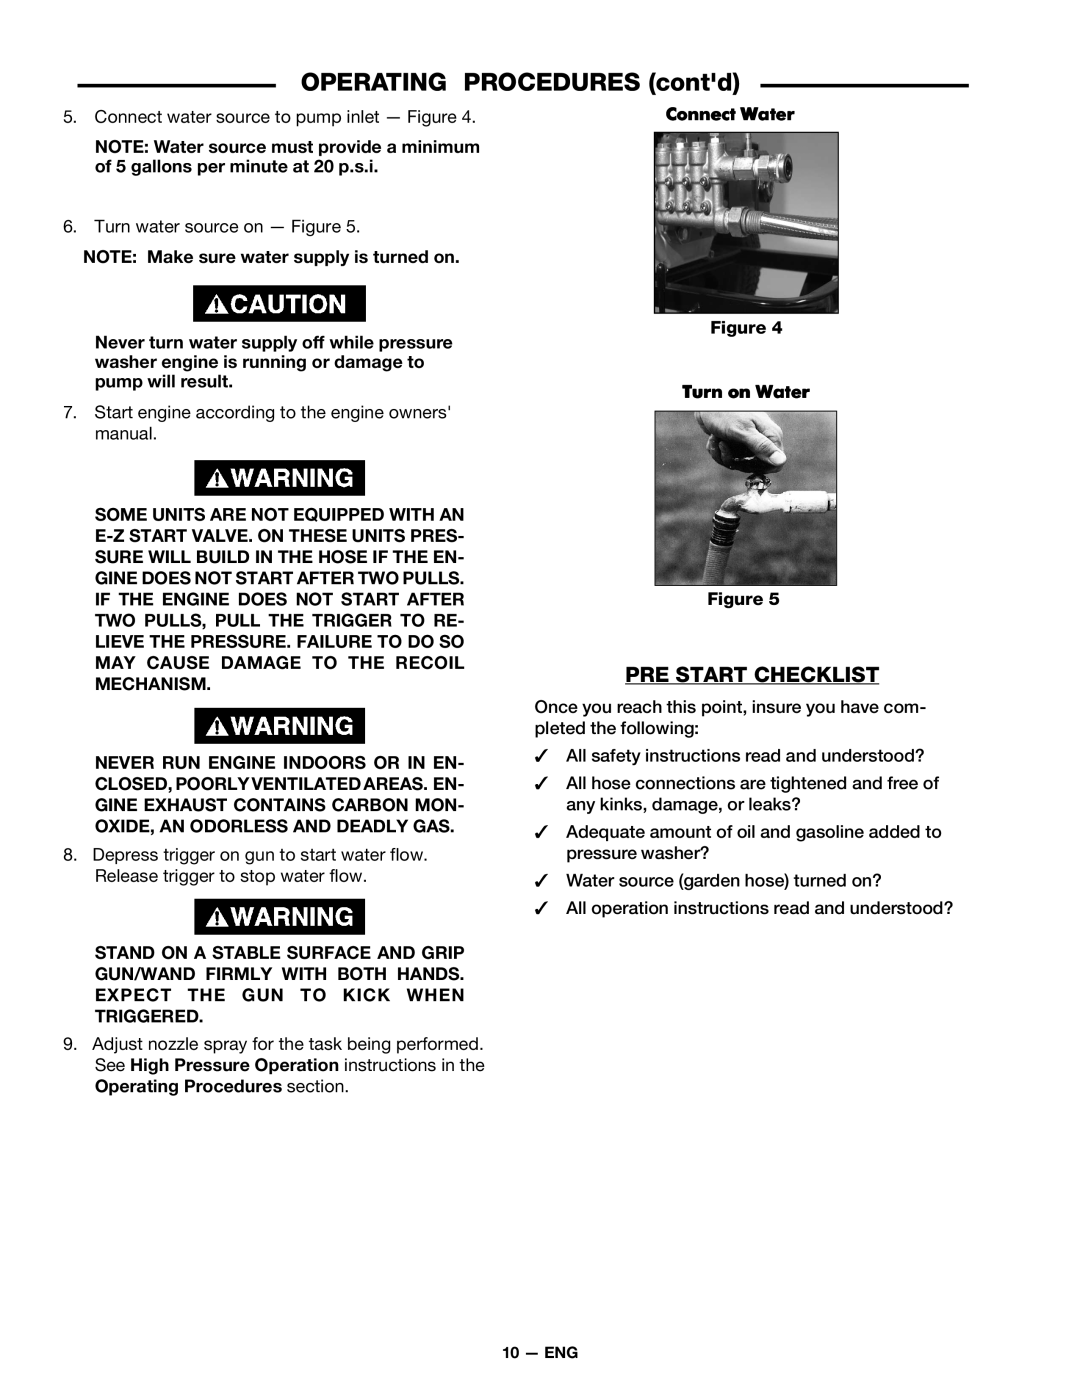 DeVillbiss Air Power Company D21684 warranty OPERATING PROCEDURES contd, Pre Start Checklist, Connect Water, Turn on Water 